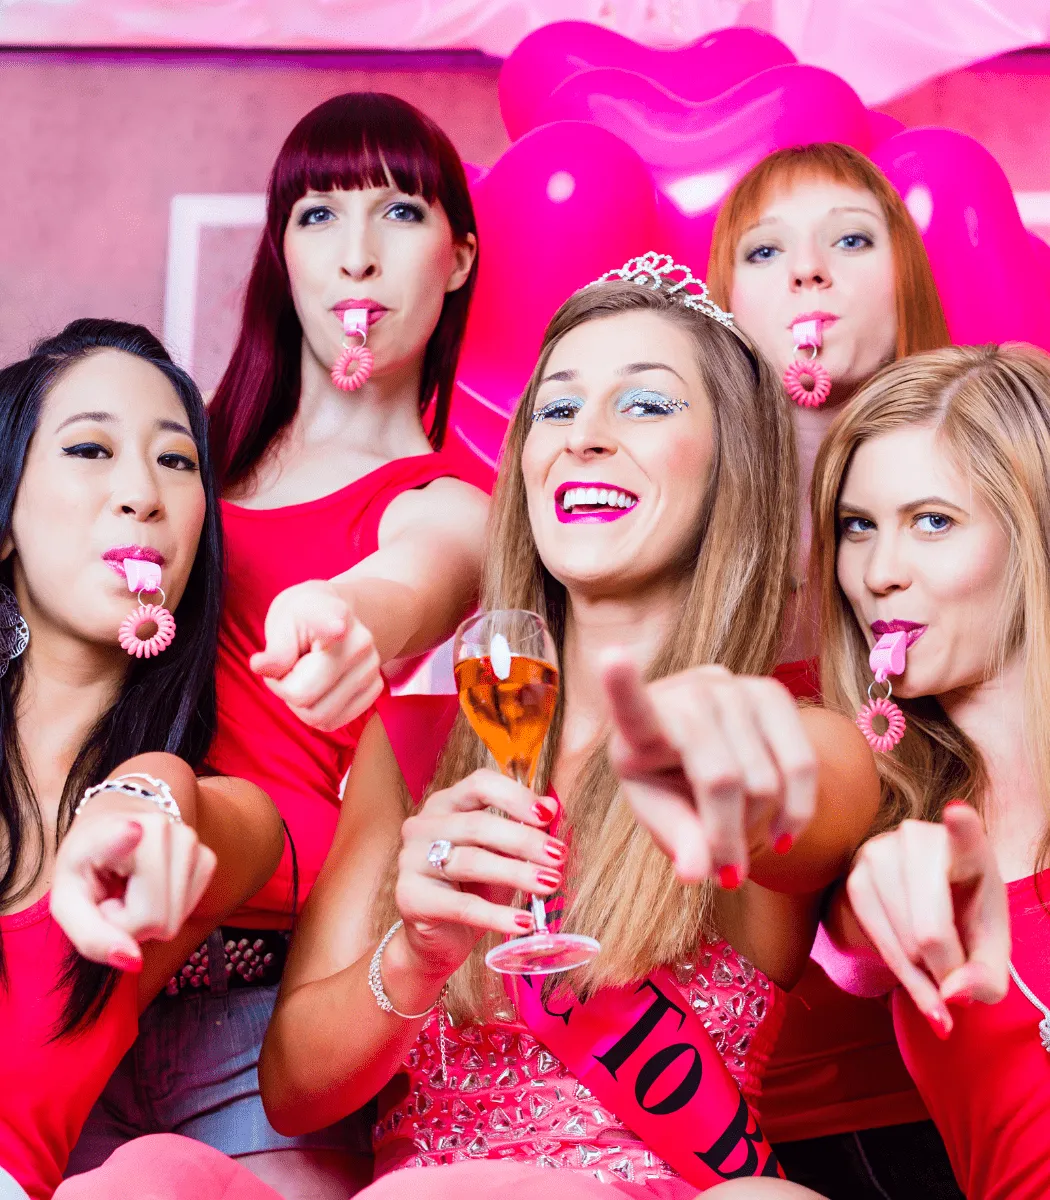 Adventure-limo-and-party-bus-tampa-st-petersburg-clearwater-sarasota-bachelorette-parties